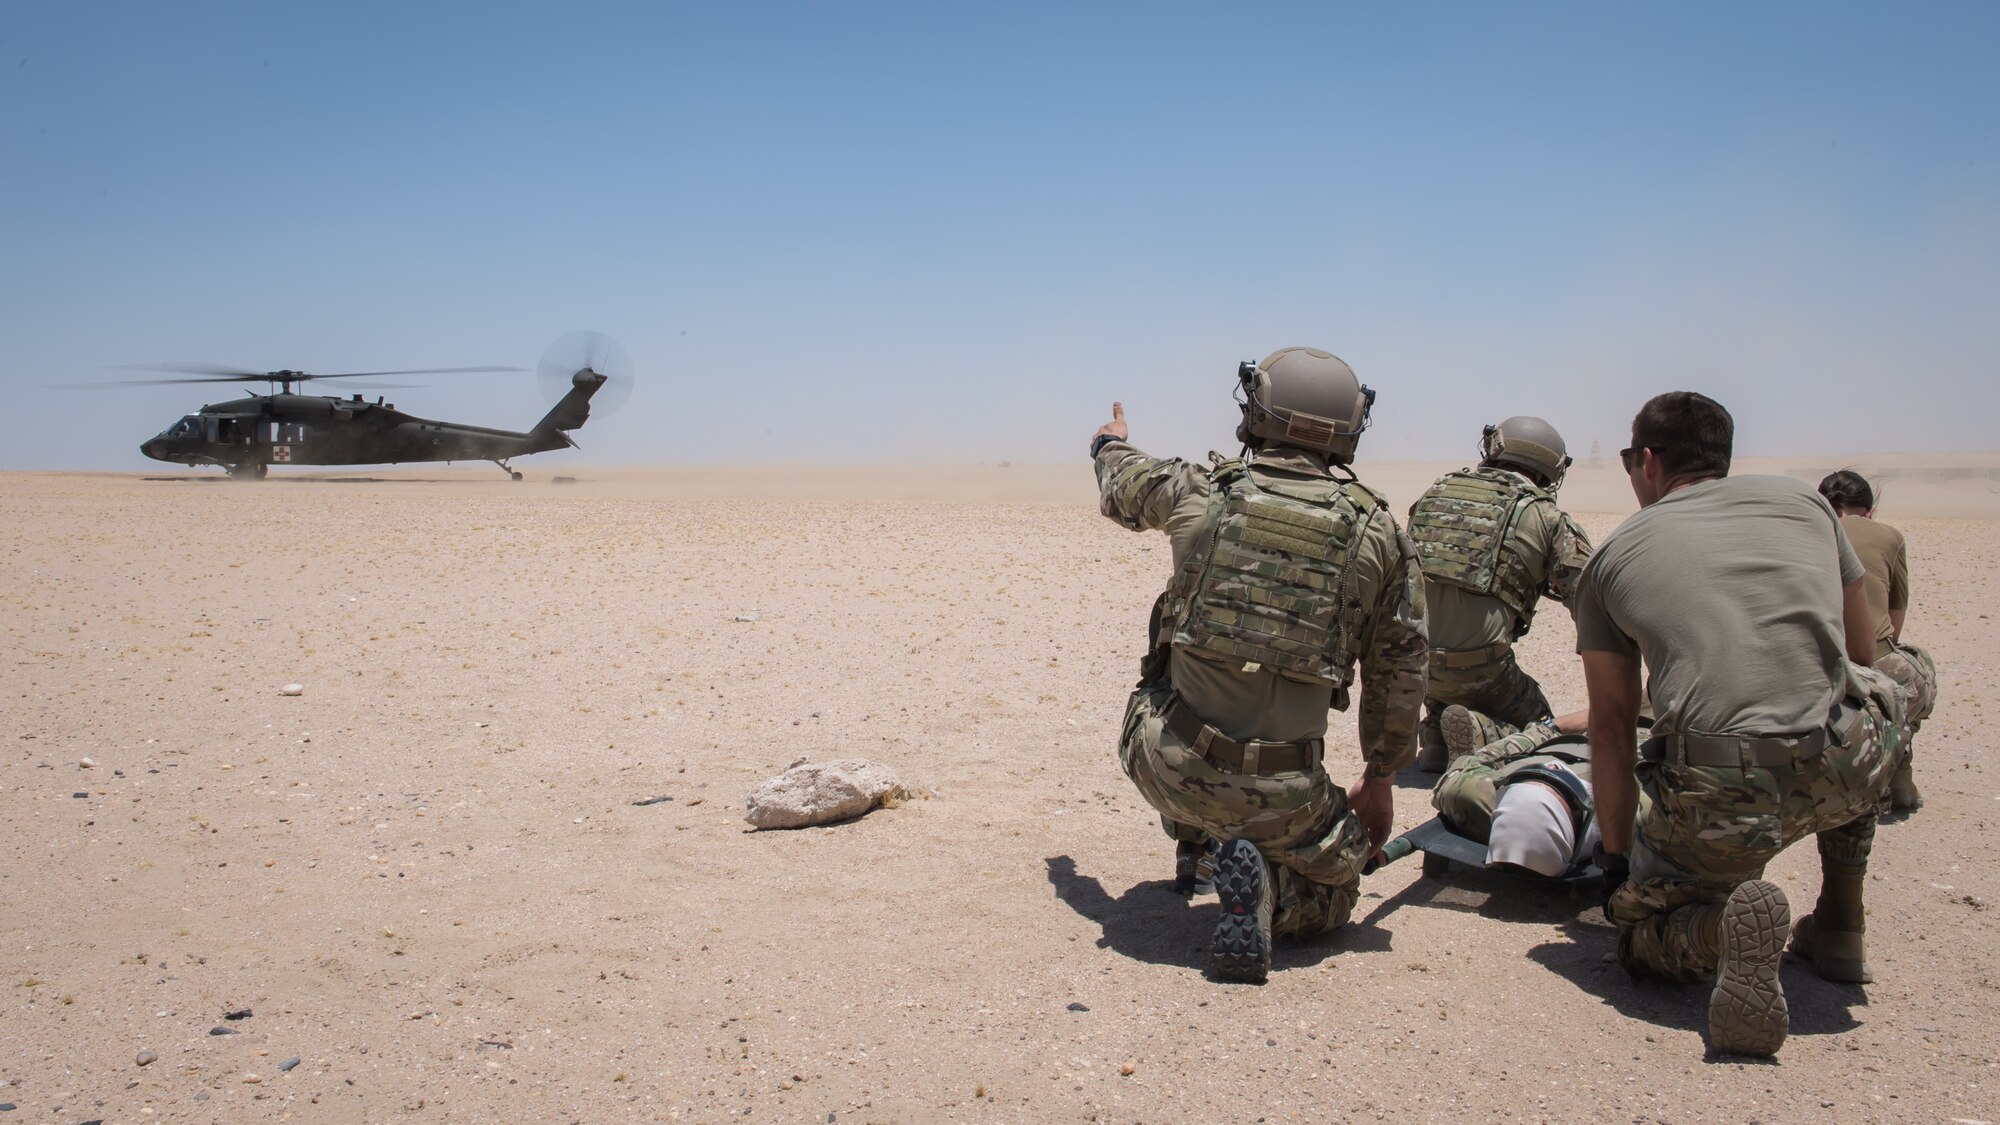 Airmen from the 386th Expeditionary Medical Group based at Ali Al Salem Air Base, Kuwait, and Tactical Air Control Party Airmen with the 82nd Expeditionary Air Support Operations Squadron, prepare to transport a patient onto a UH-60 Blackhawk helicopter during medical evacuation training at Camp Buehring, Kuwait, July 12, 2019. Medics and TACP’s trained together to hone their skills and become more efficient at treating injuries and coordinating medevac efforts for casualties. (U.S. Air Force photo by Tech. Sgt. Daniel Martinez)